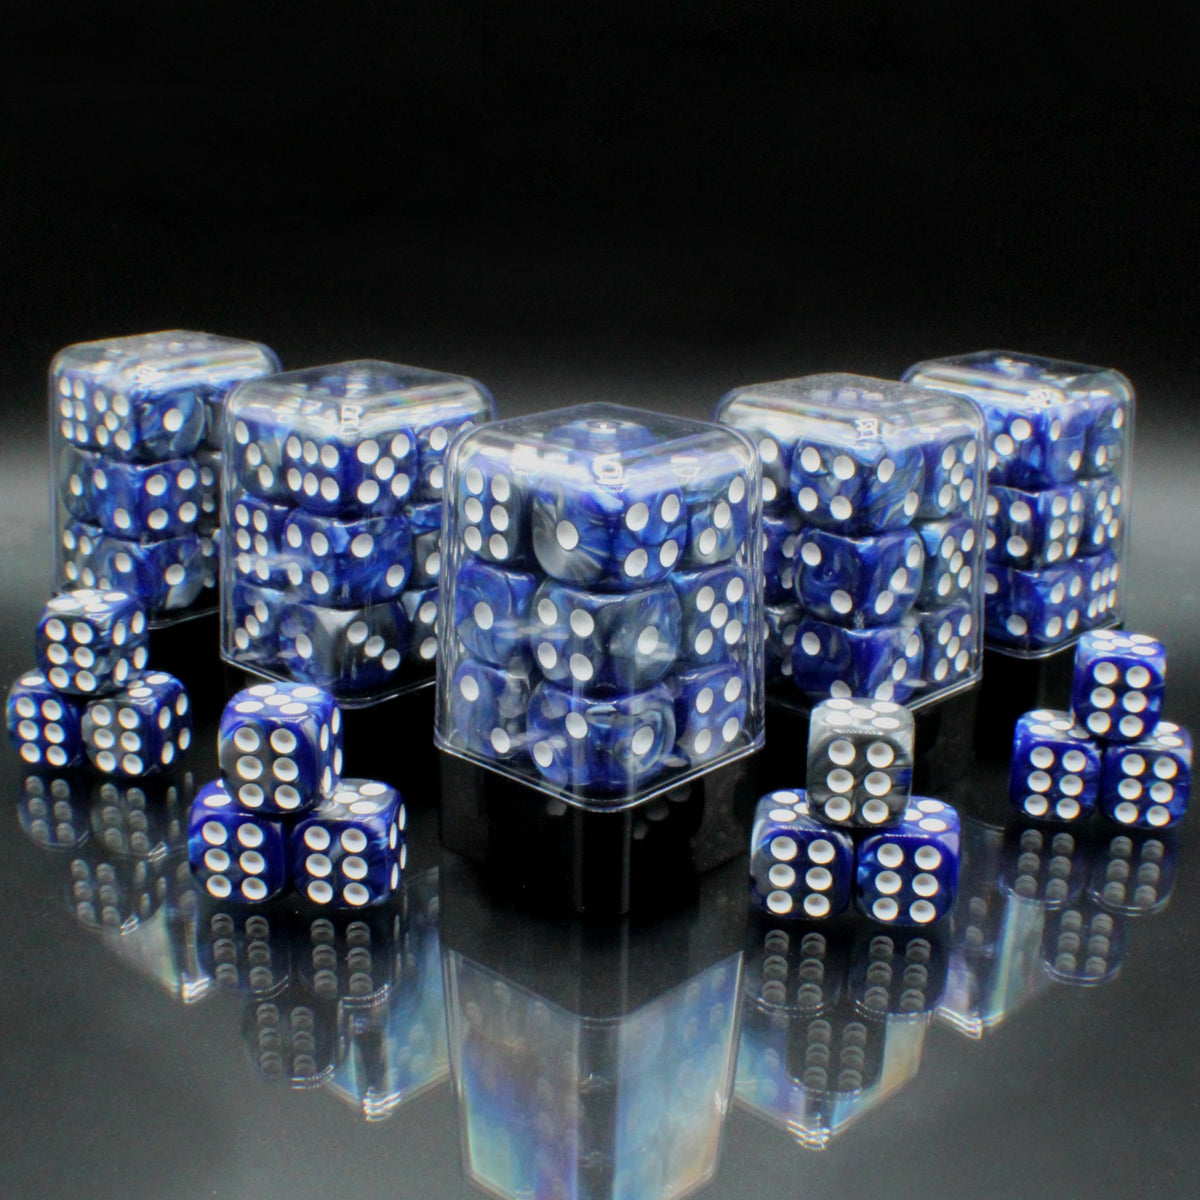 Wargaming 36 and 60 Dice Pack, 16mm D6 Dice in Multiple Colors!